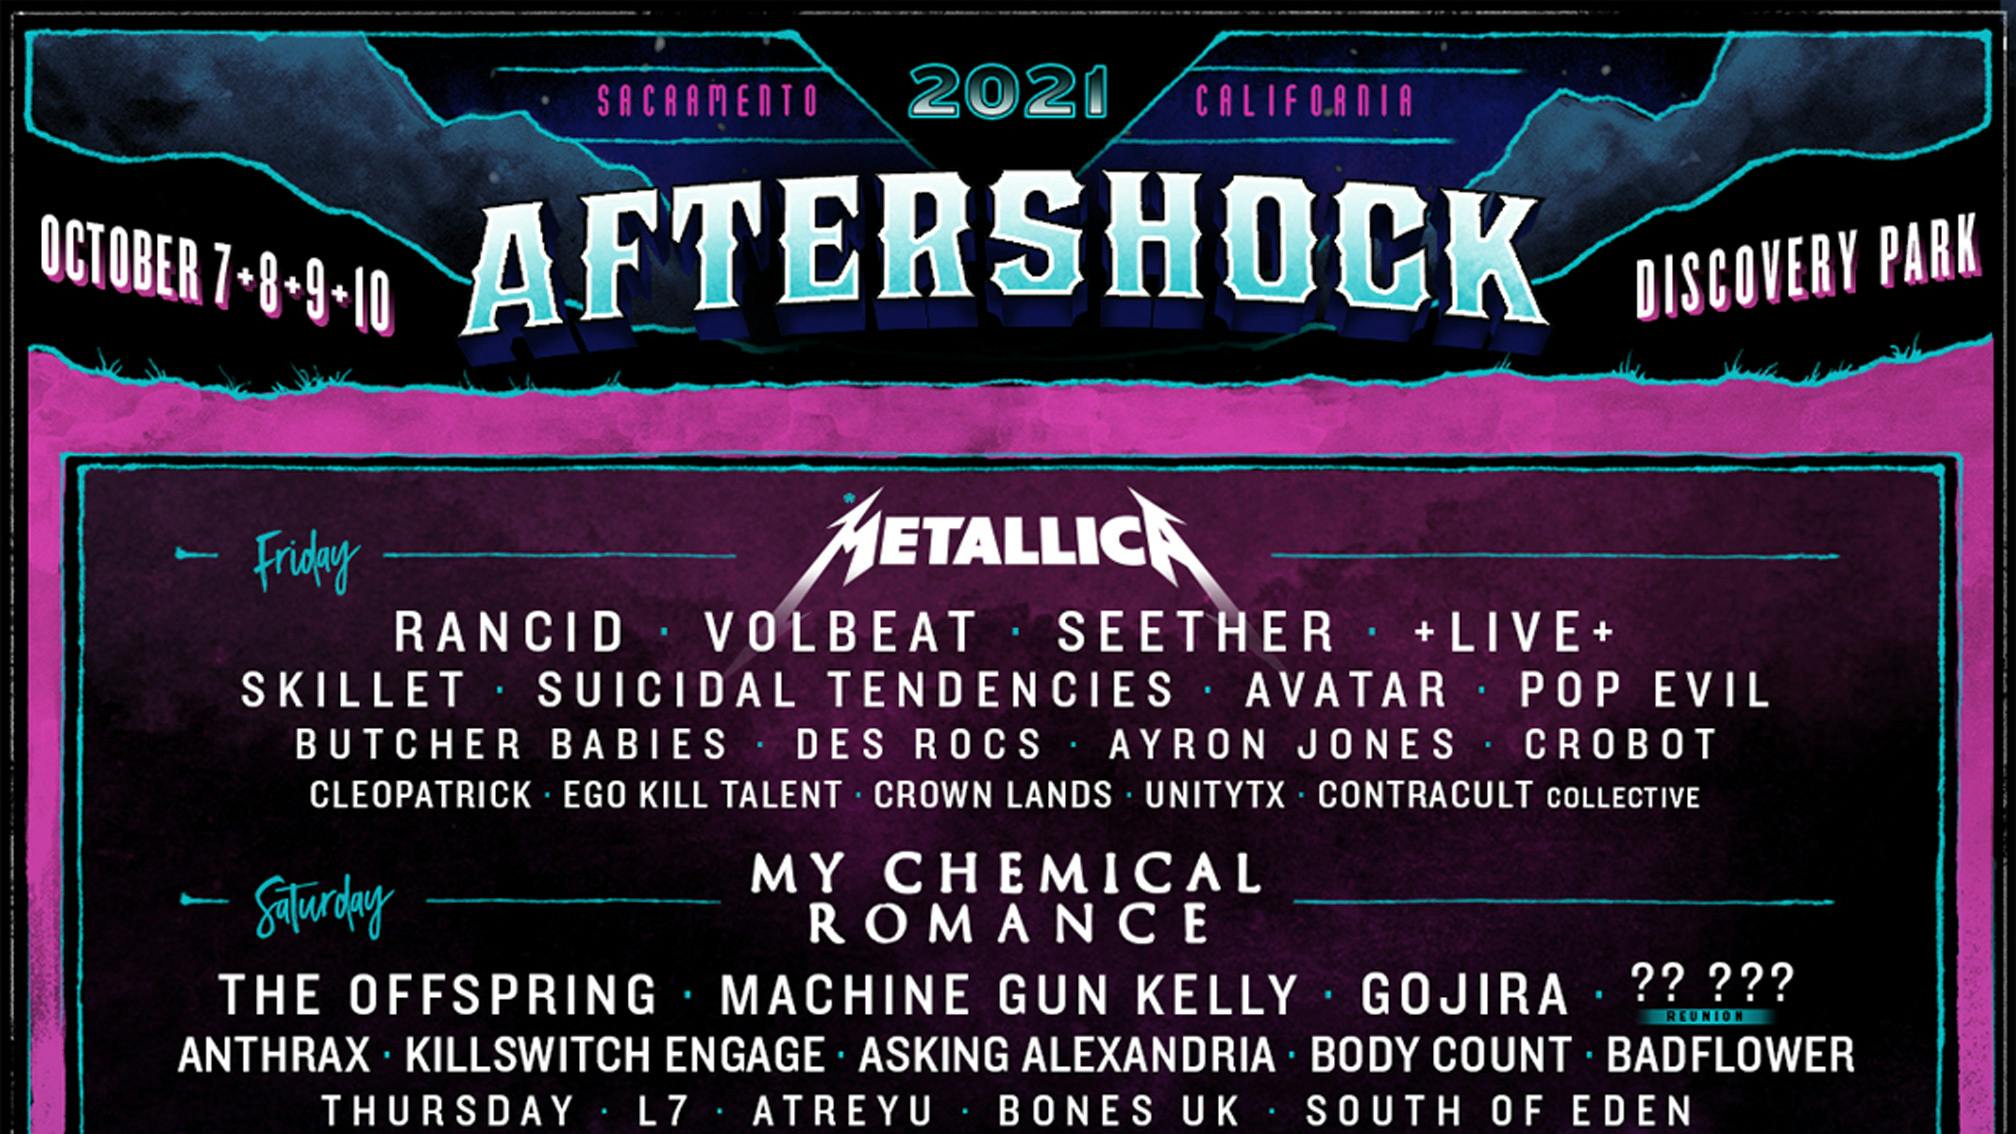 Metallica And My Chemical Romance To Headline Aftershock 2021